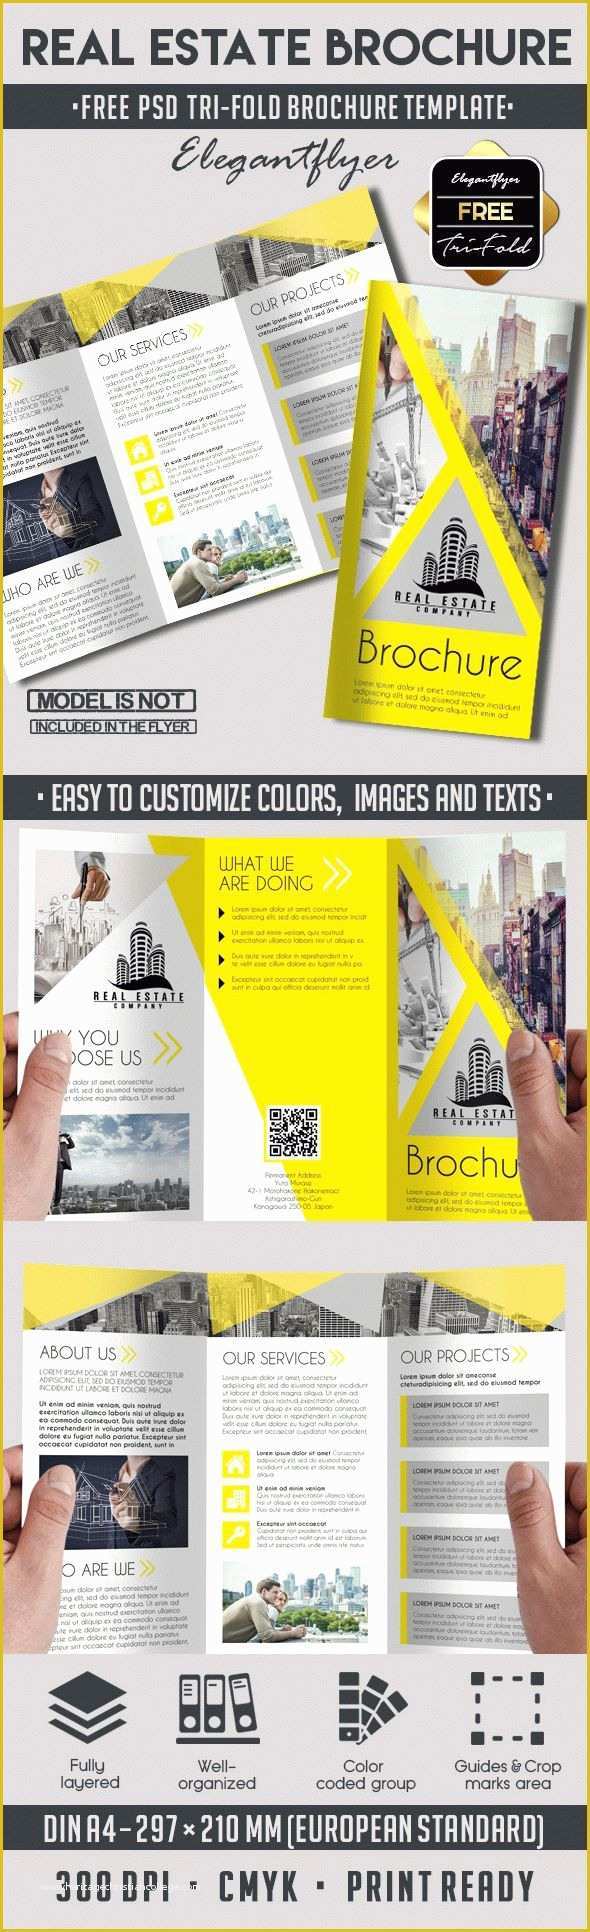 Free Real Estate Brochure Templates Of Real Estate – Free Tri Fold Psd Brochure Template – by